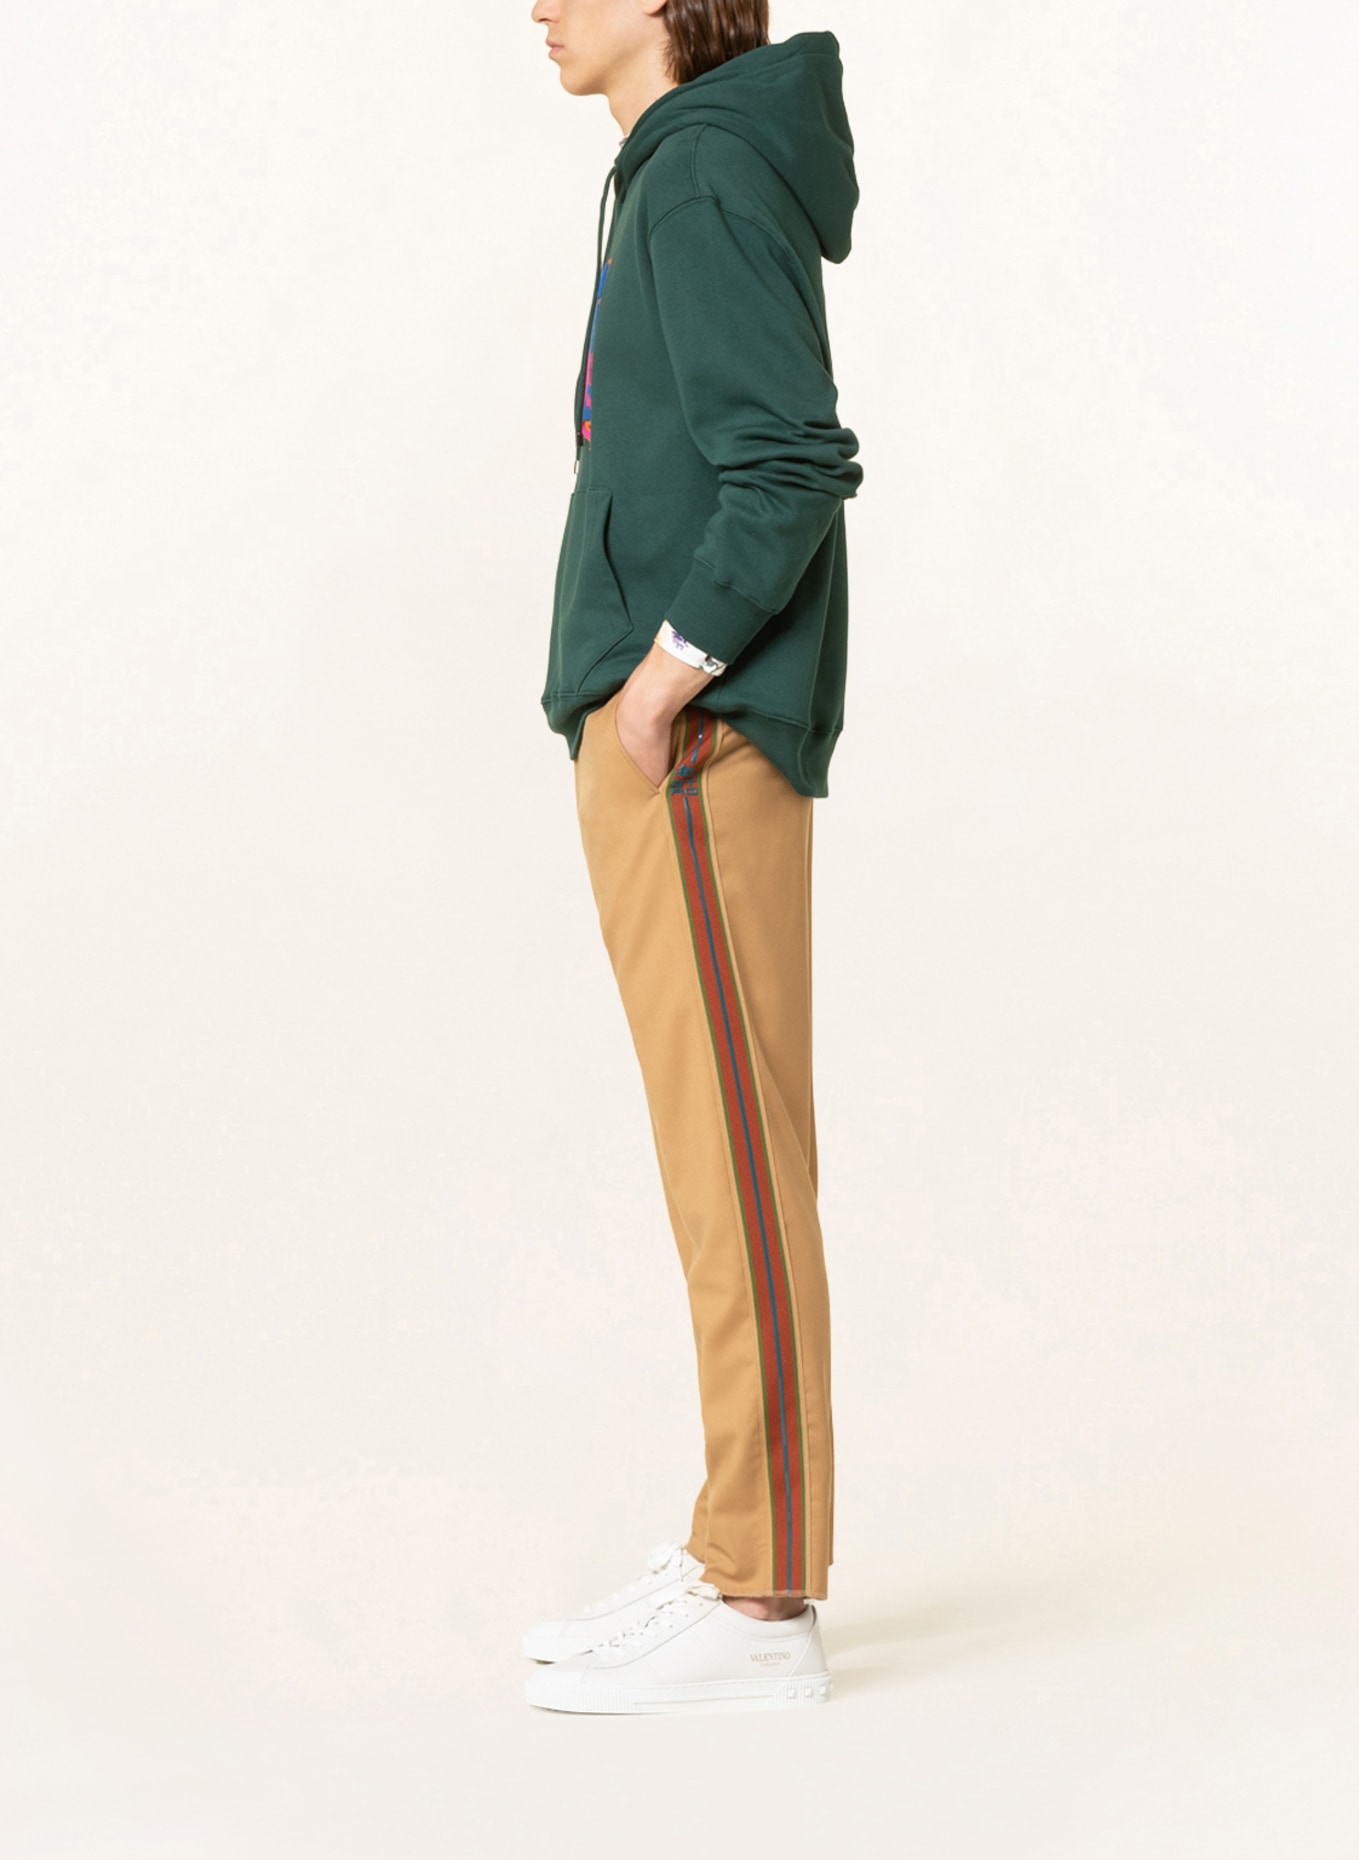 ETRO Pants in jogger style extra slim fit , Color: CAMEL (Image 4)